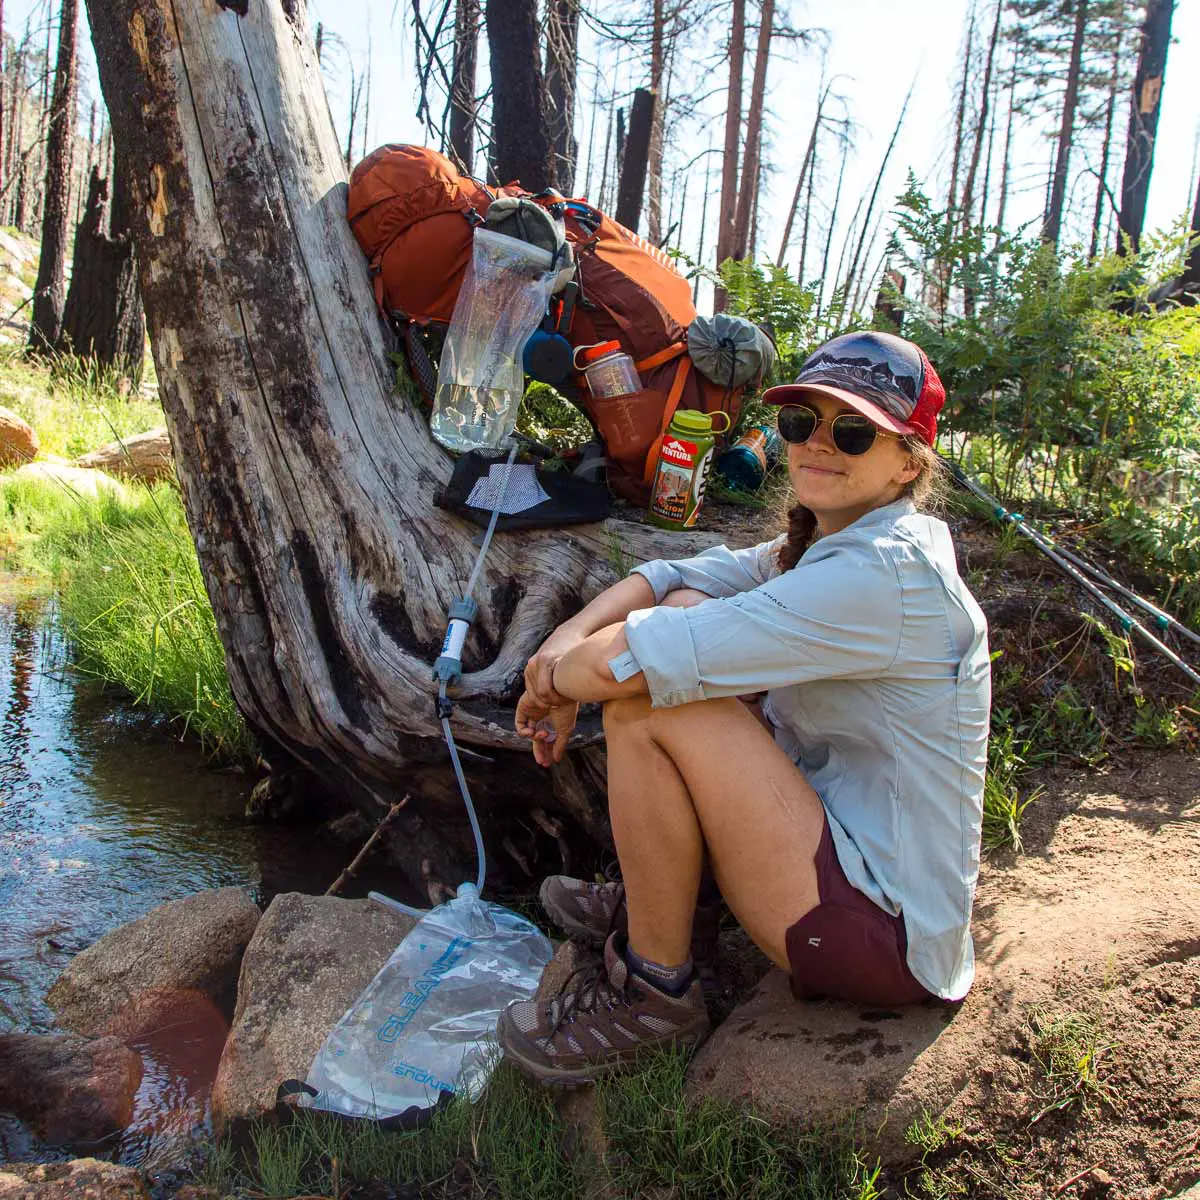 Megan sitting next to the Platypus GravityWorks water filter, which is rigged up on a tree next to a stream